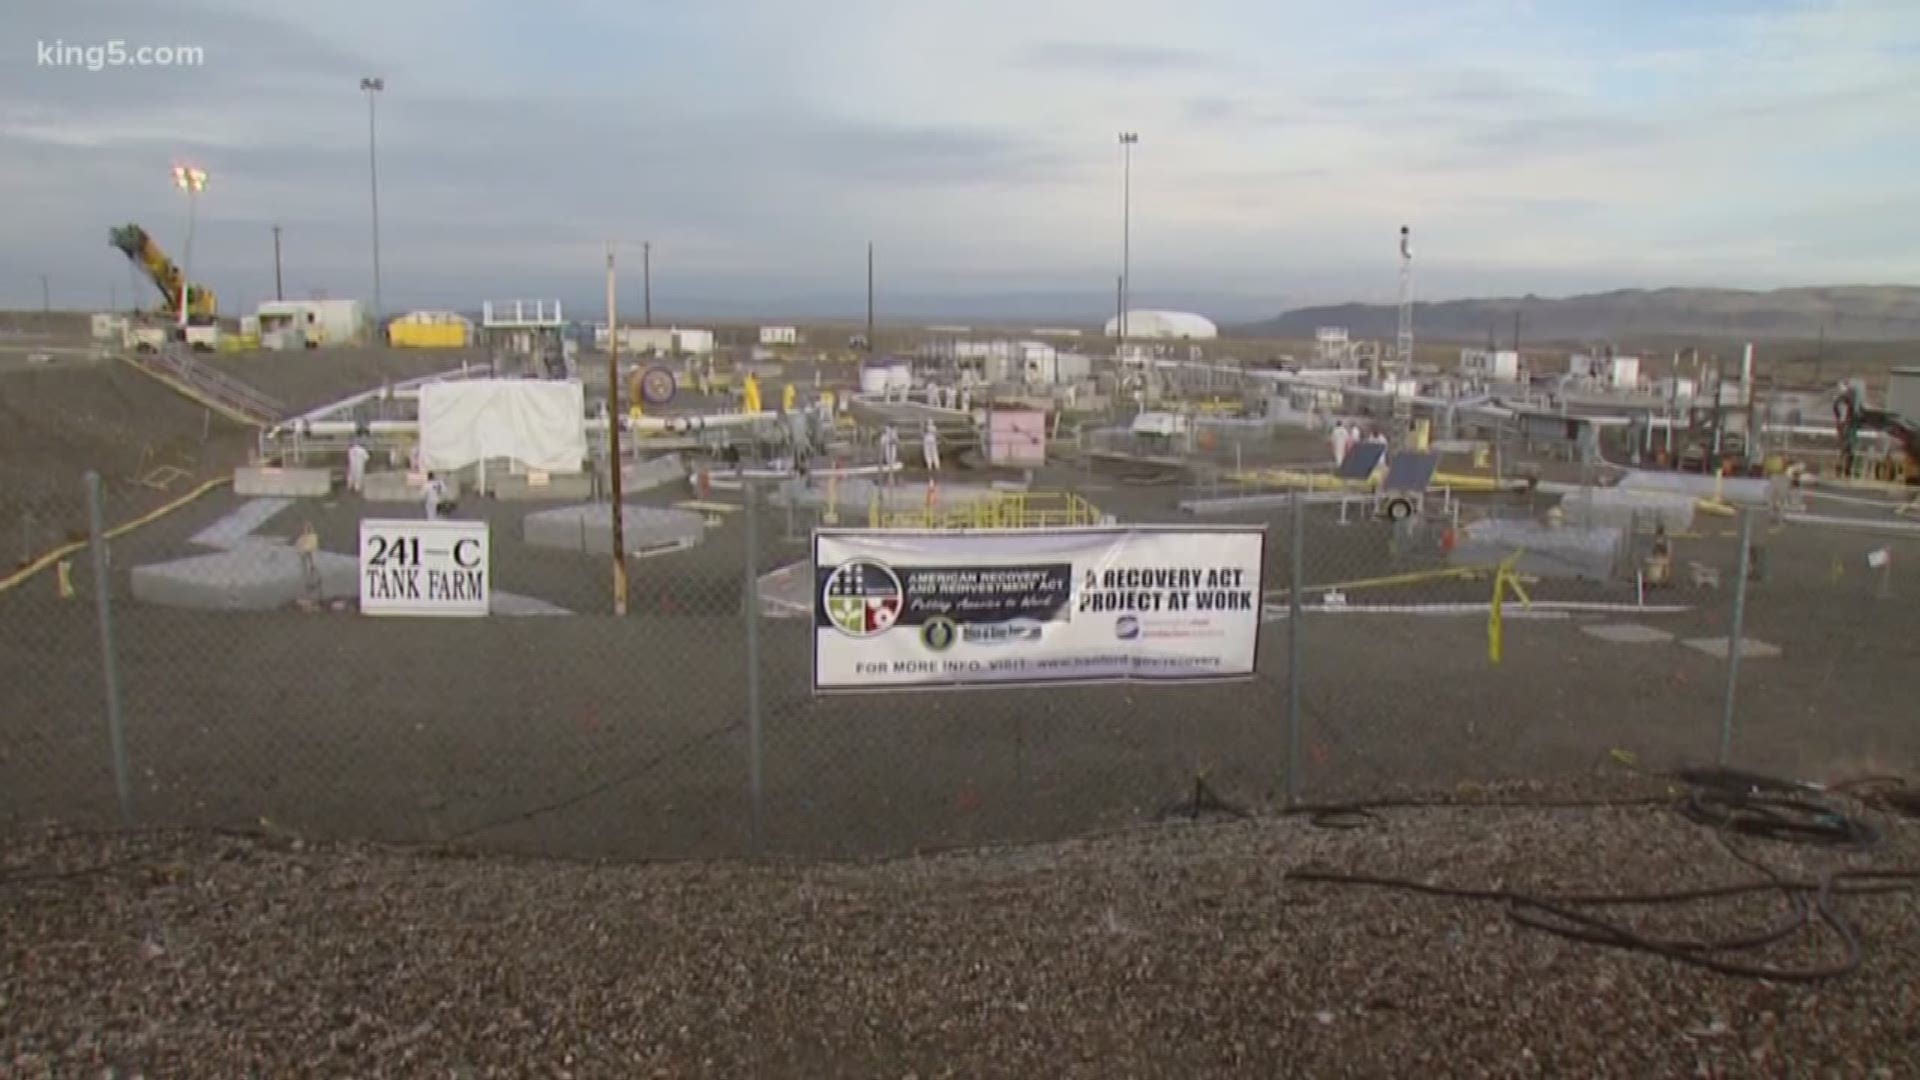 A 2015 lawsuit filed by Washington Attorney General Bob Ferguson against Hanford and the federal government is settled. The agreement is designed to bring decades of suffering to an end.